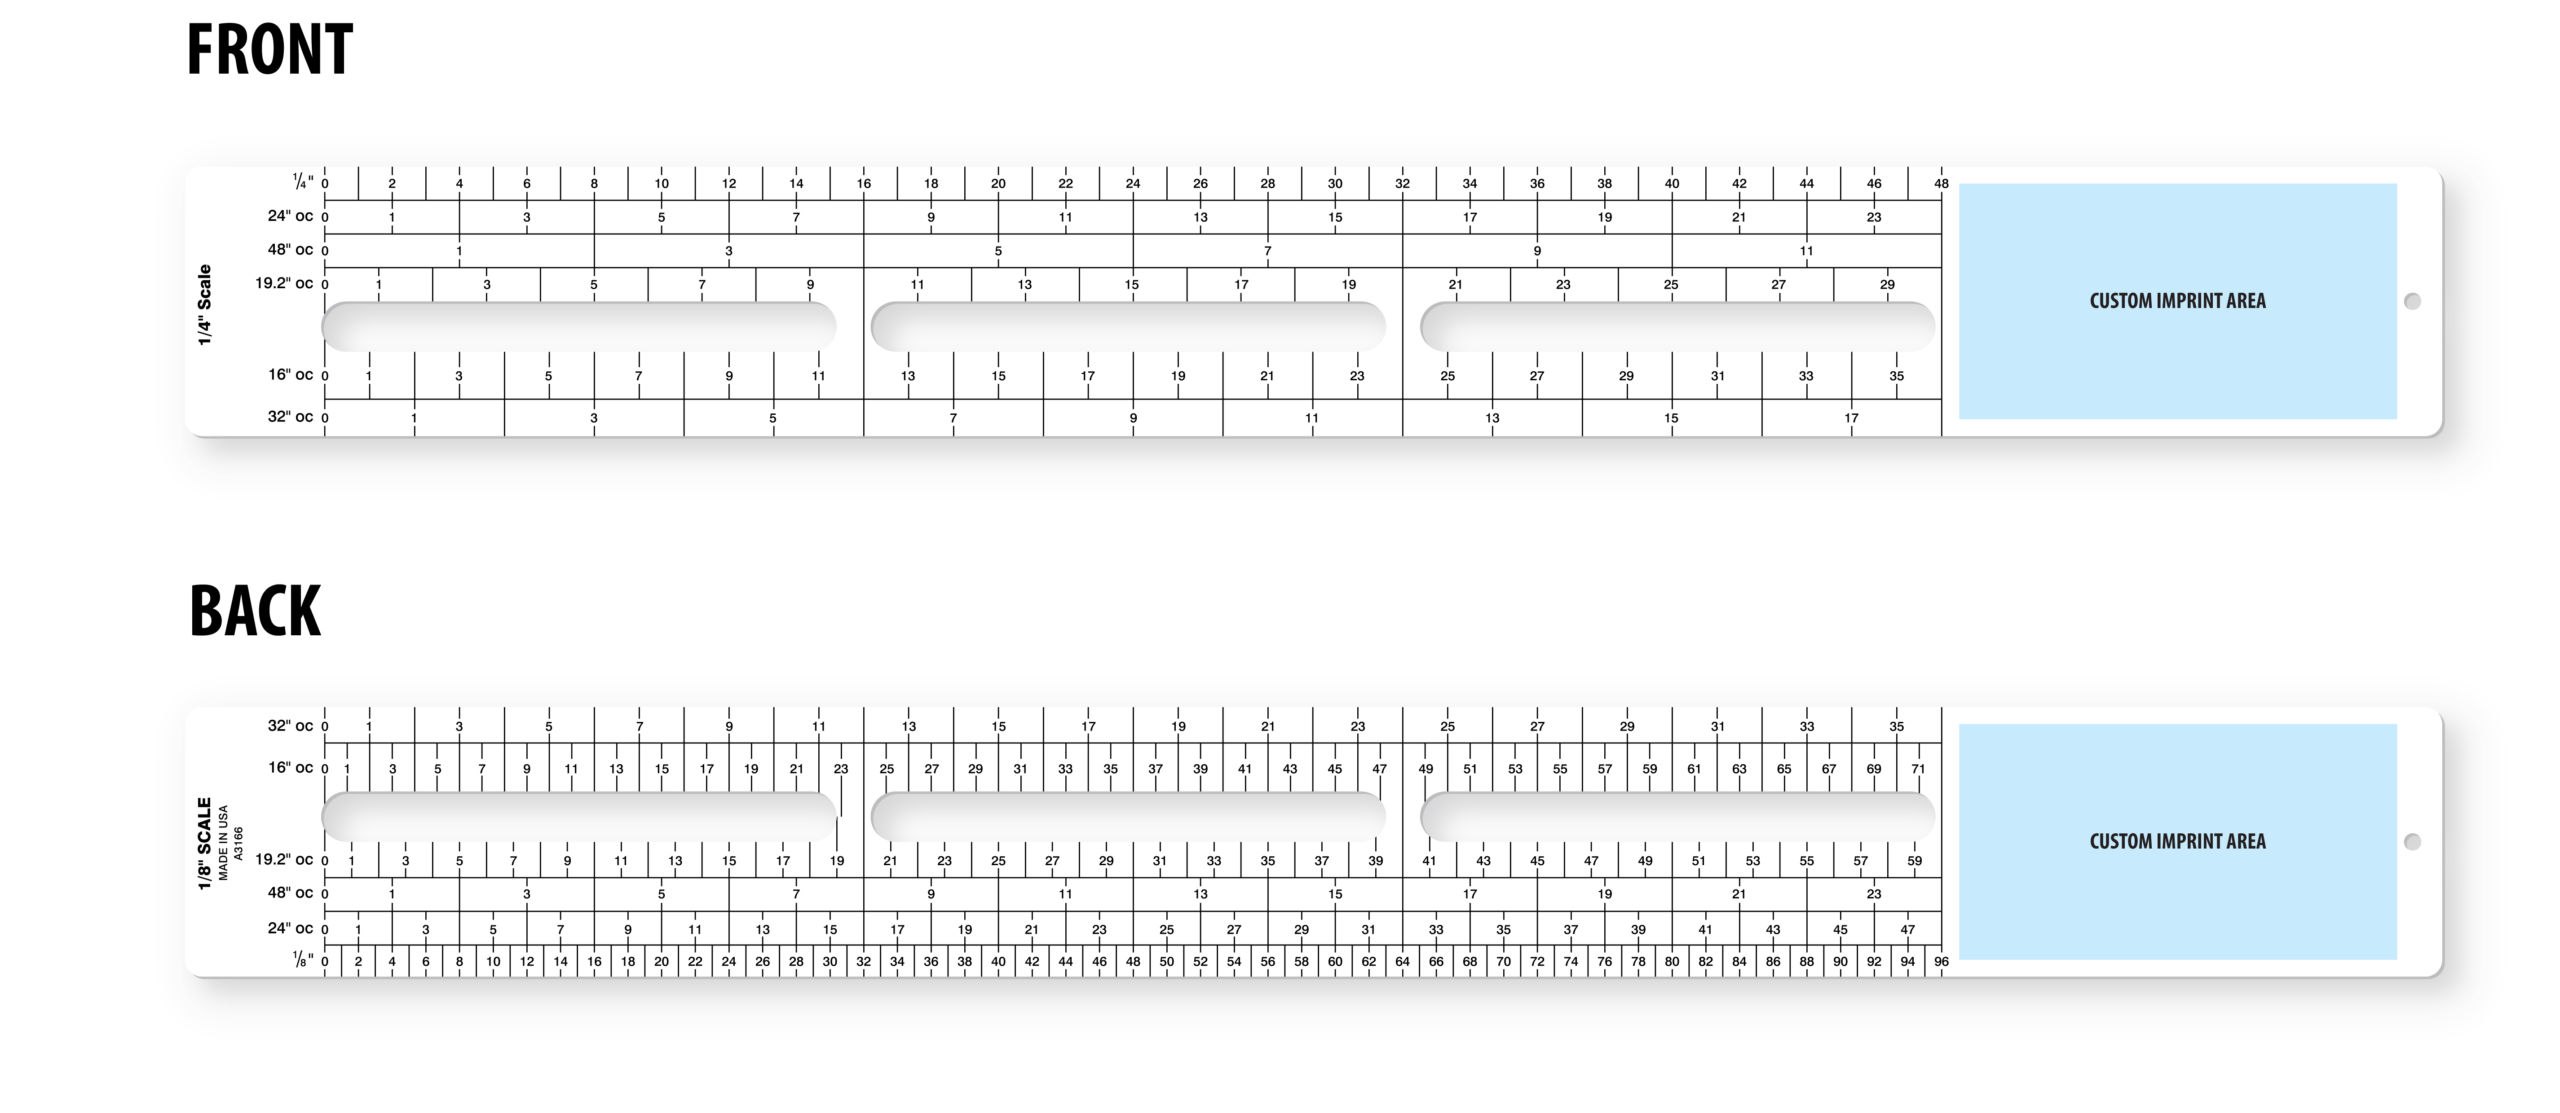 Front and back images with custom imprint area of 16.75" wide truss spacing ruler